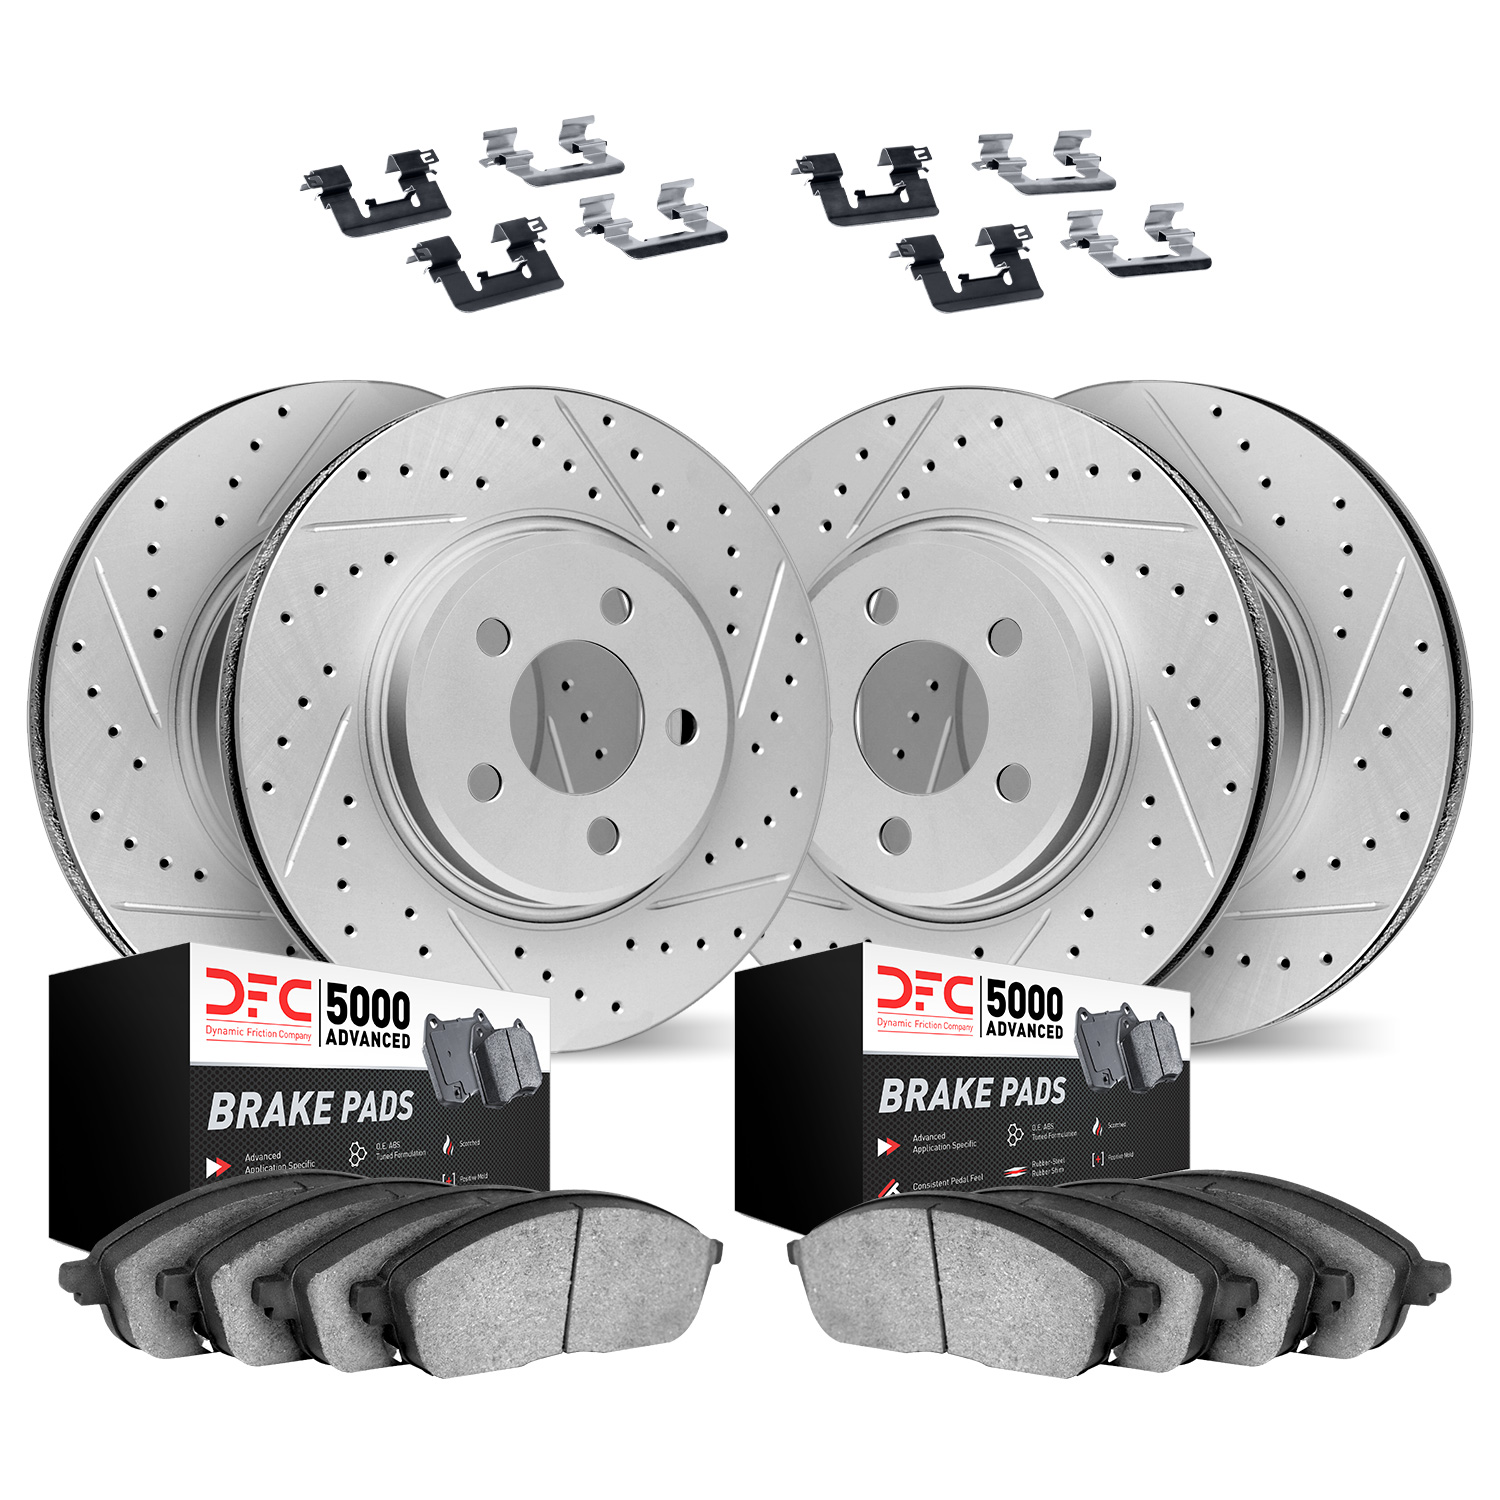 2514-13004 Geoperformance Drilled/Slotted Rotors w/5000 Advanced Brake Pads Kit & Hardware, 2003-2004 Subaru, Position: Front an